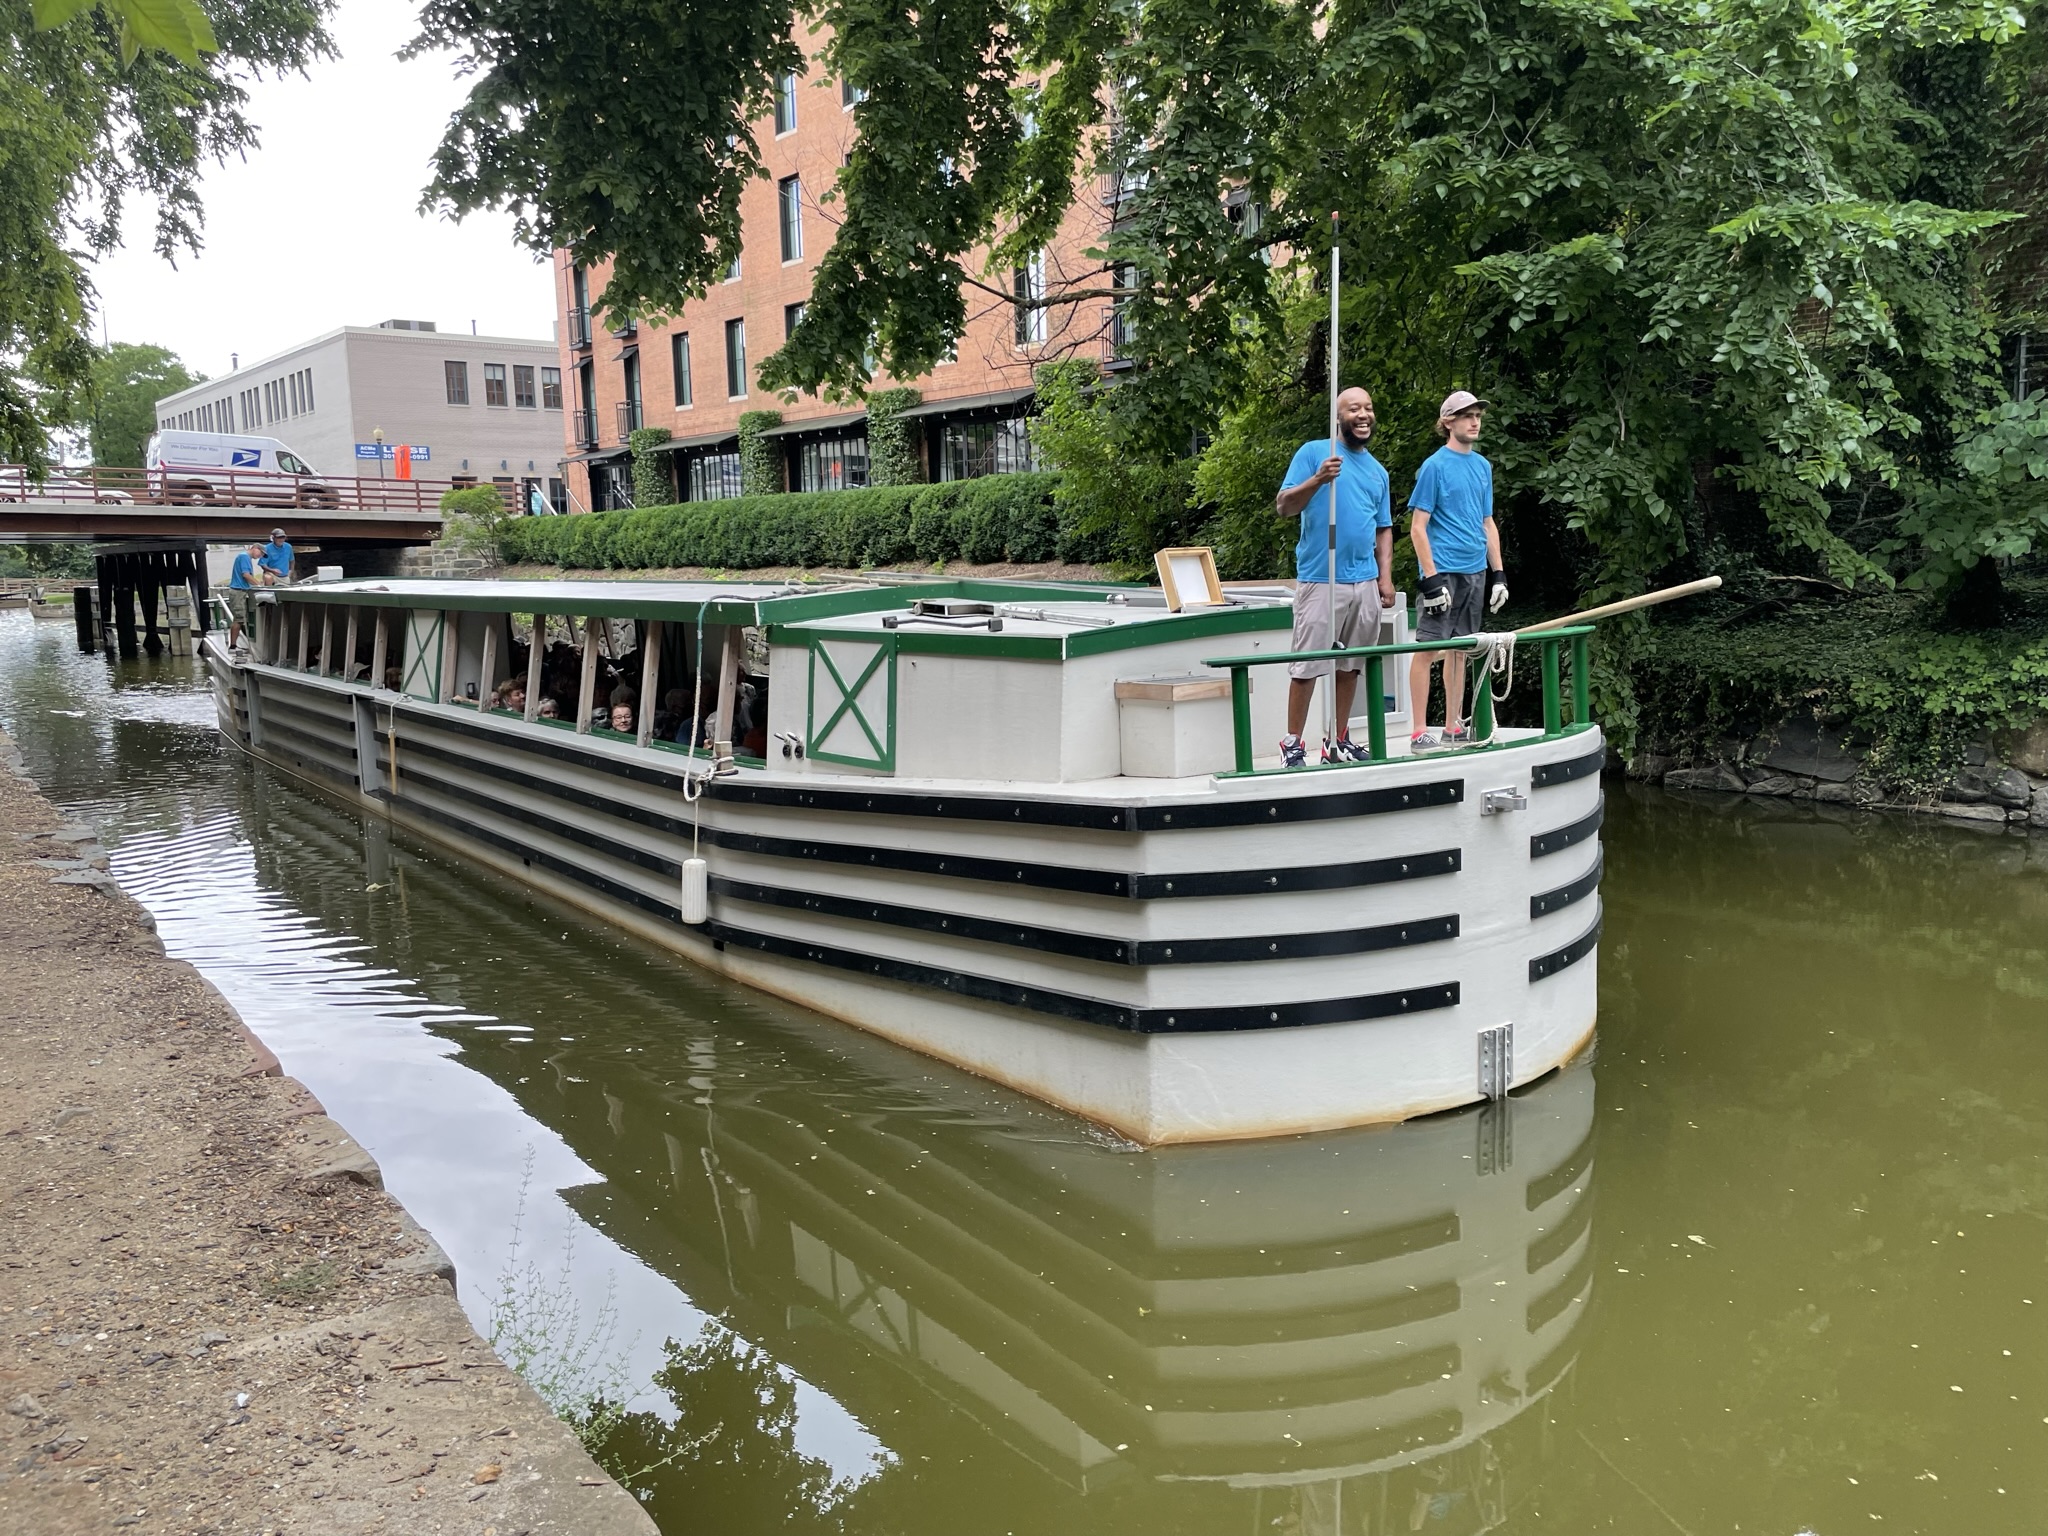 Barge into History on the C&O Canal